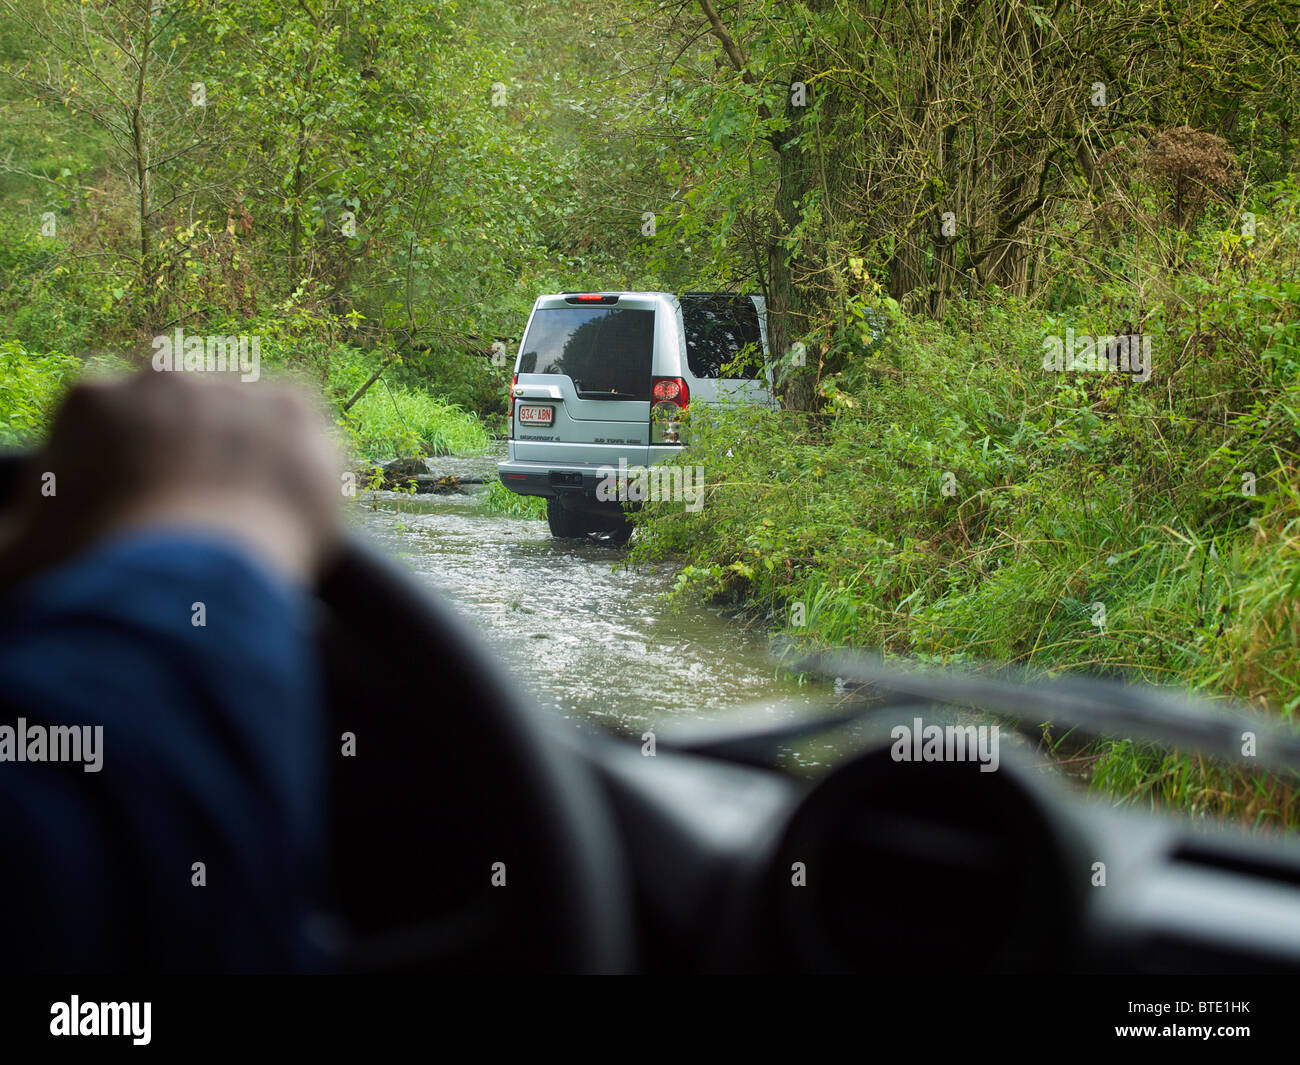 Driver's view of Land Rover Discovery 4 driving through a river at the Domaine d'Arthey estate in Belgium Stock Photo